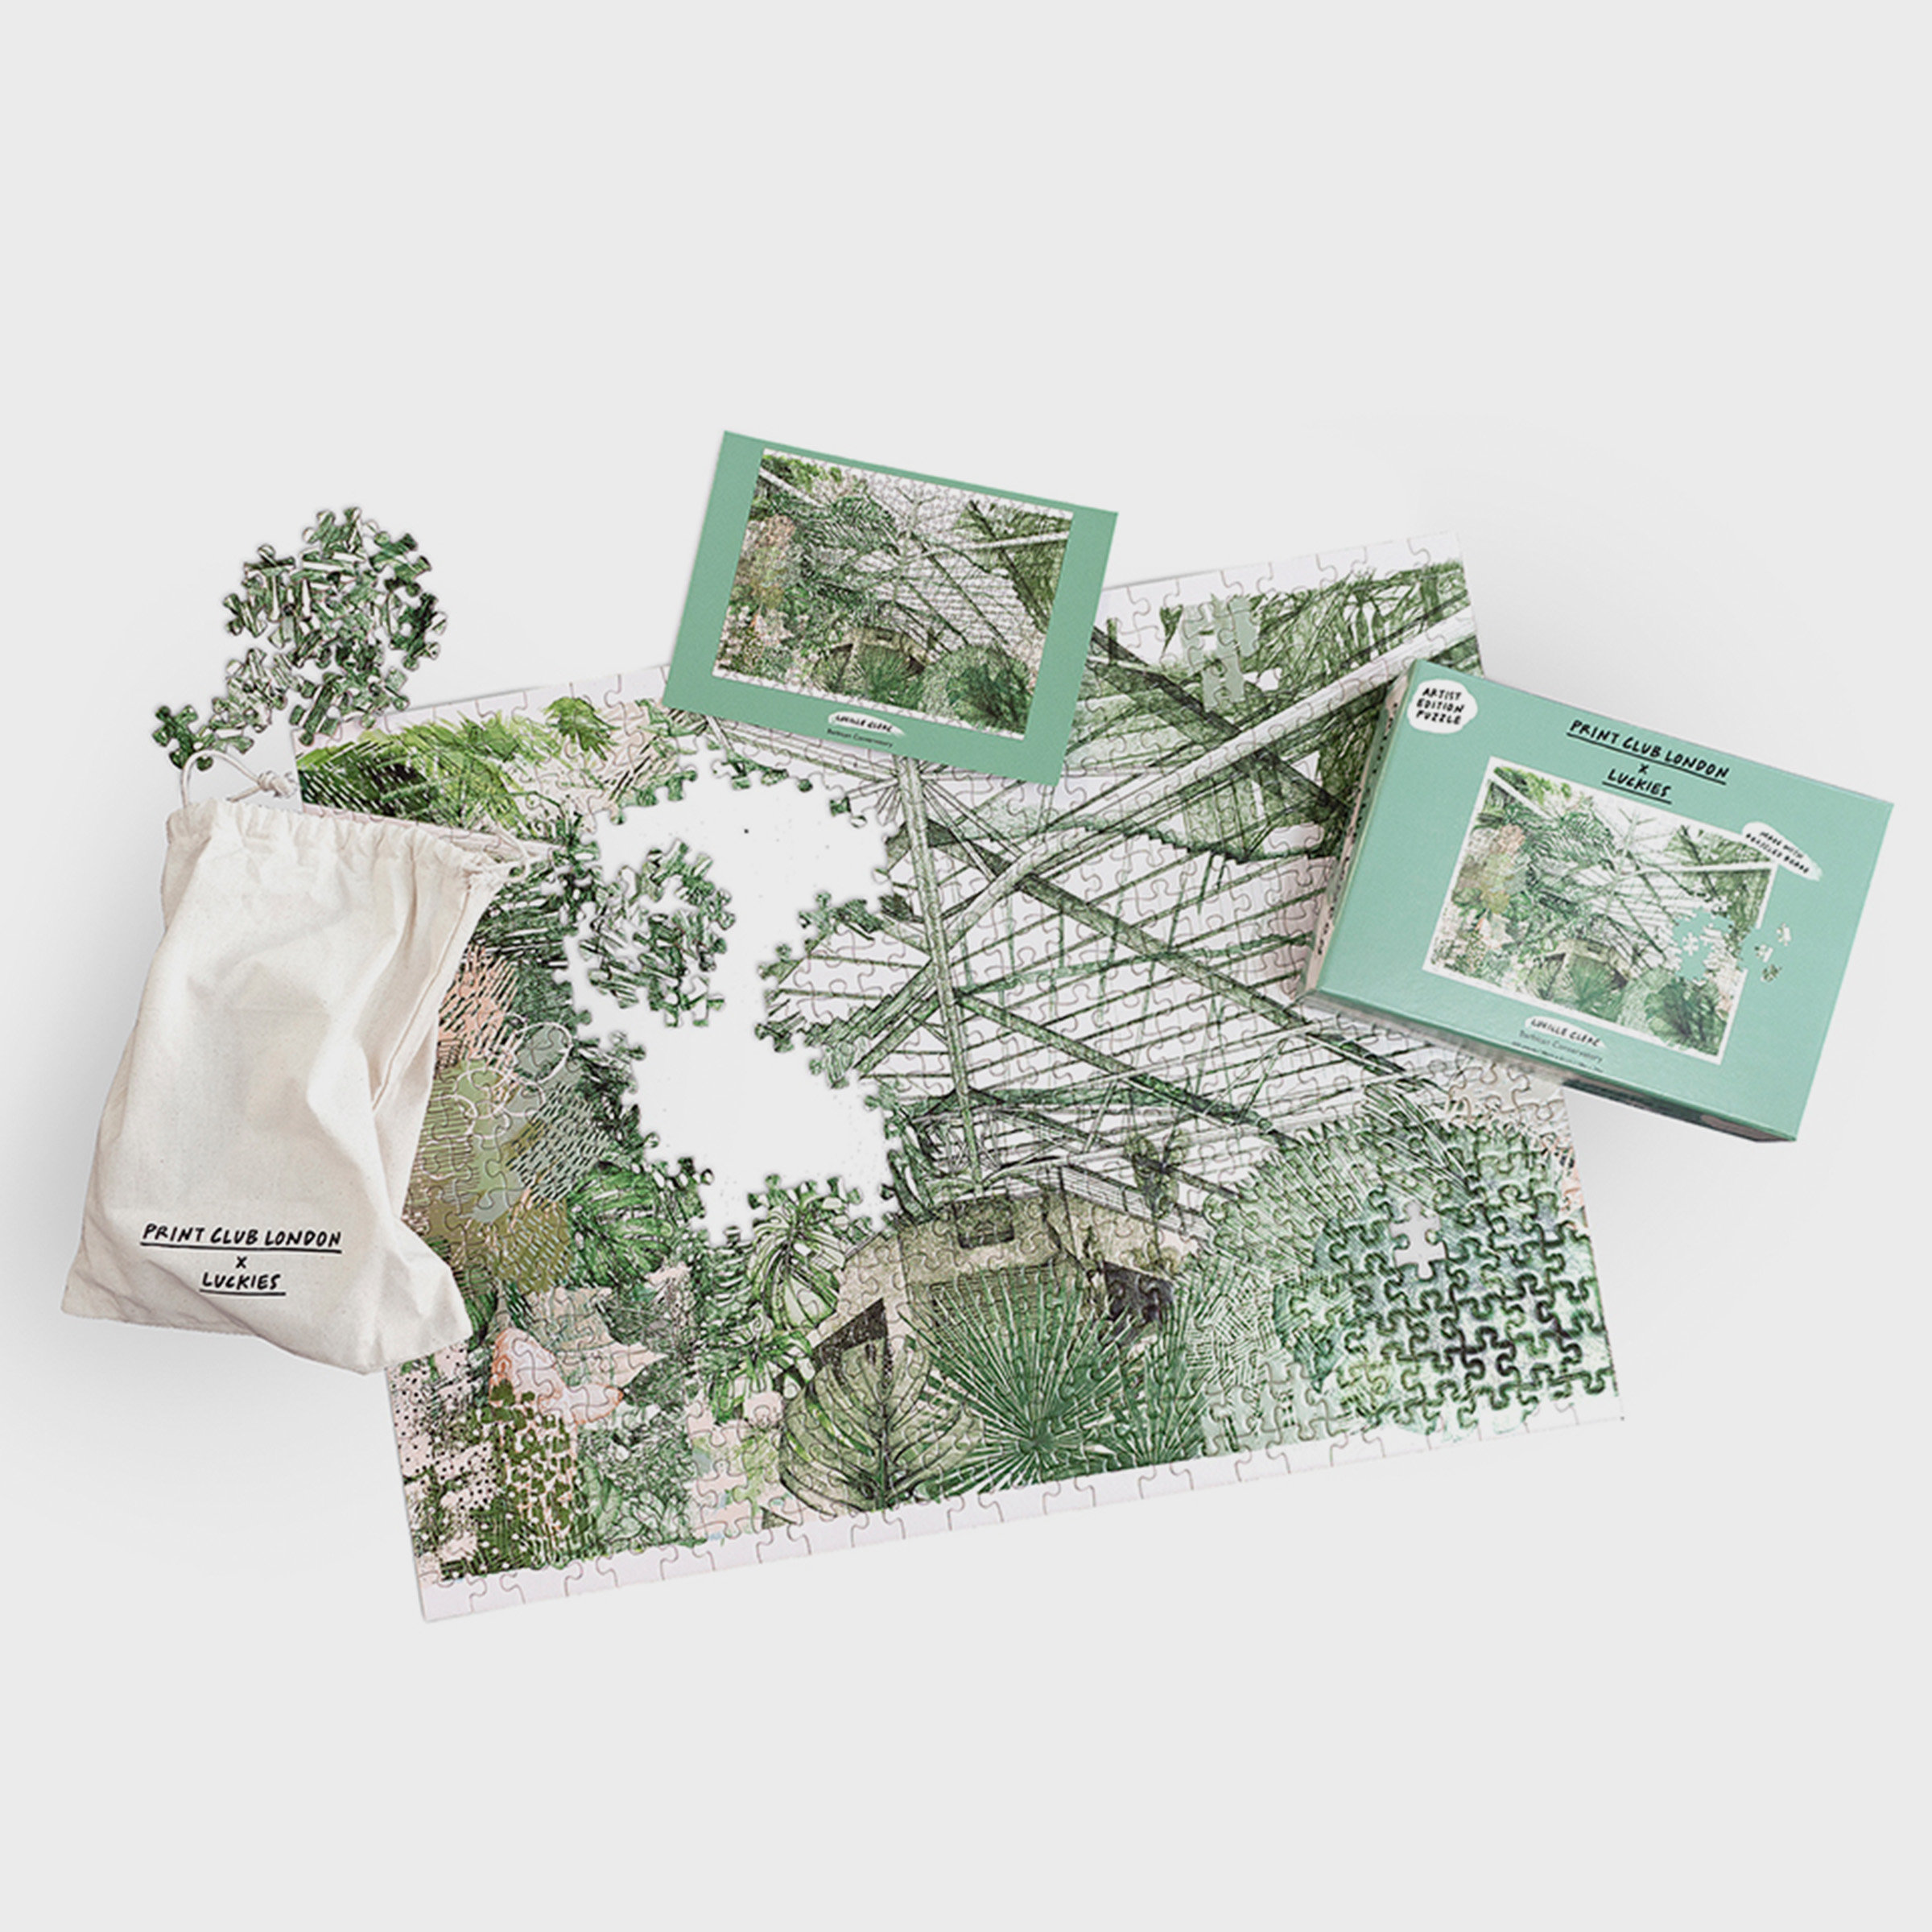 Print Club - Barbican Conservatory Jigsaw Puzzle